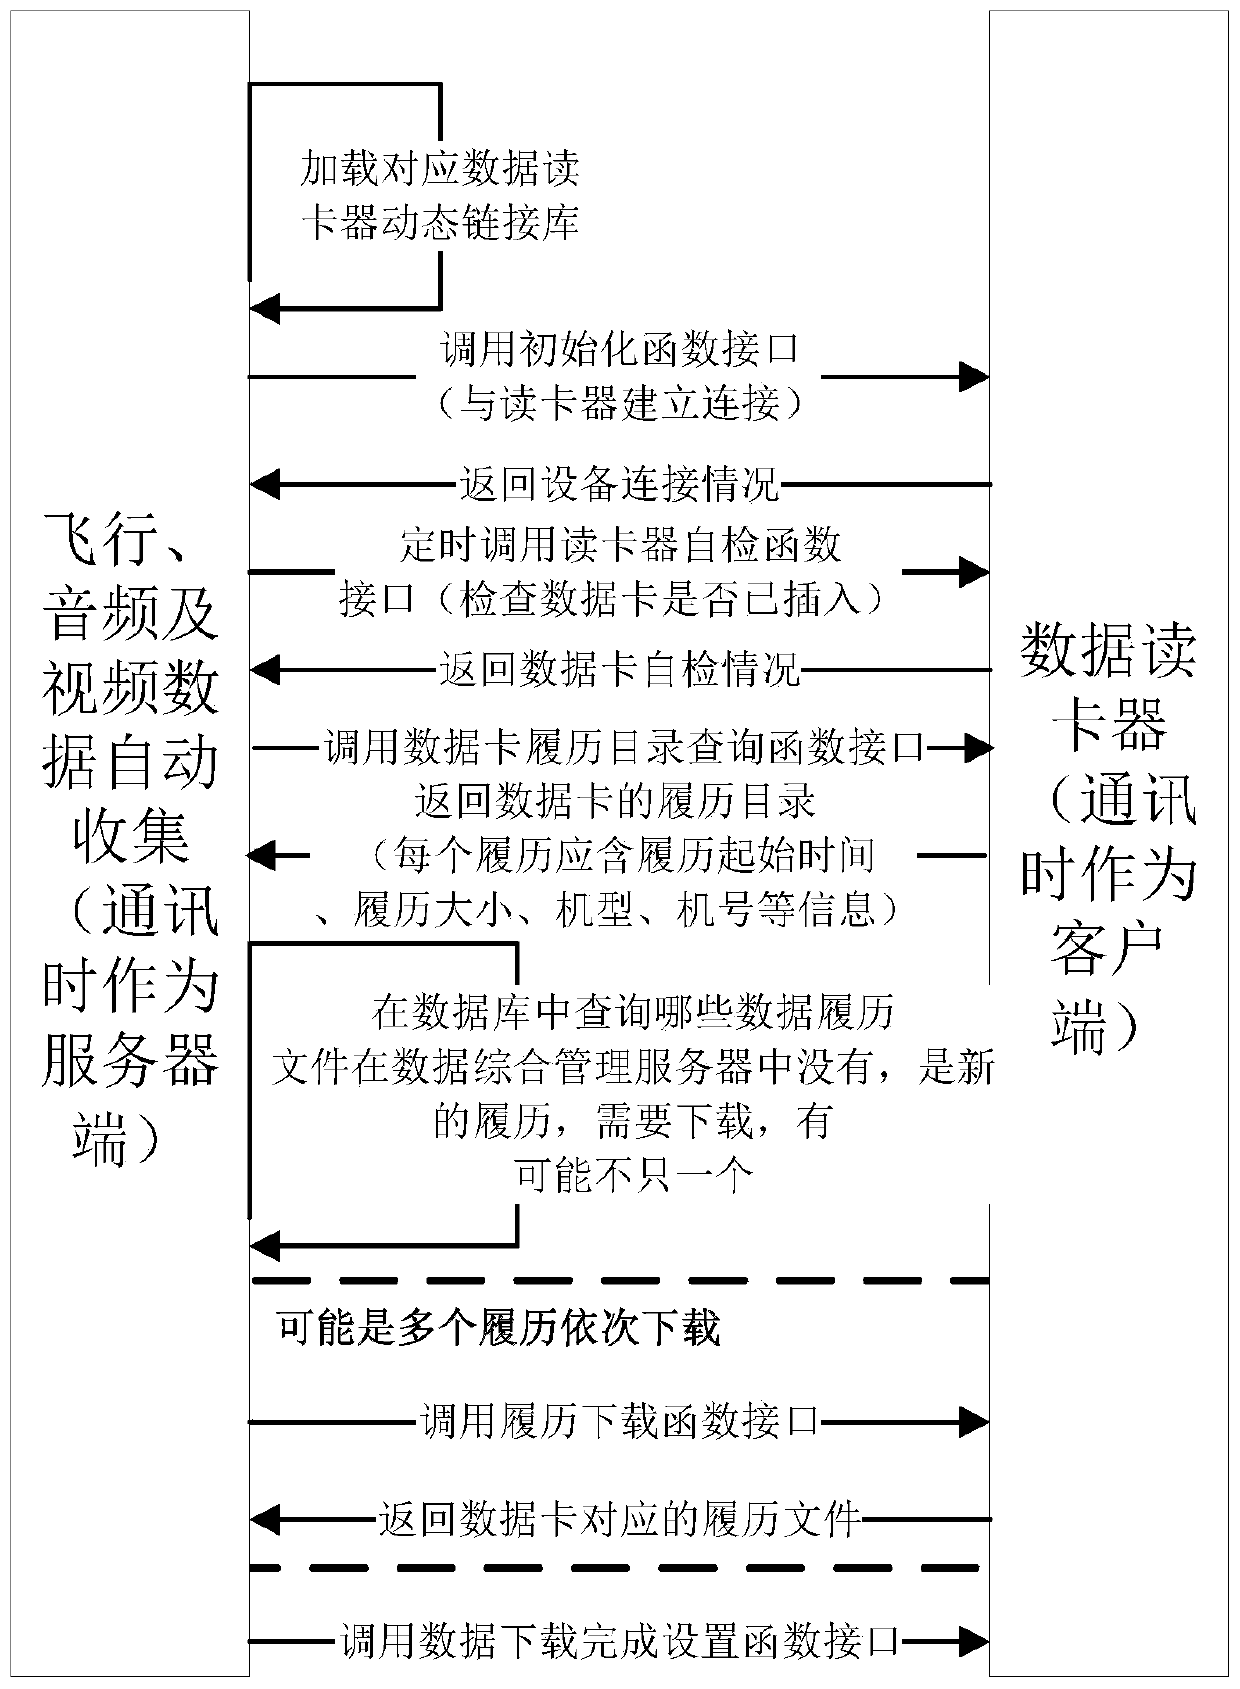 Cluster health integrated management system architecture and construction method